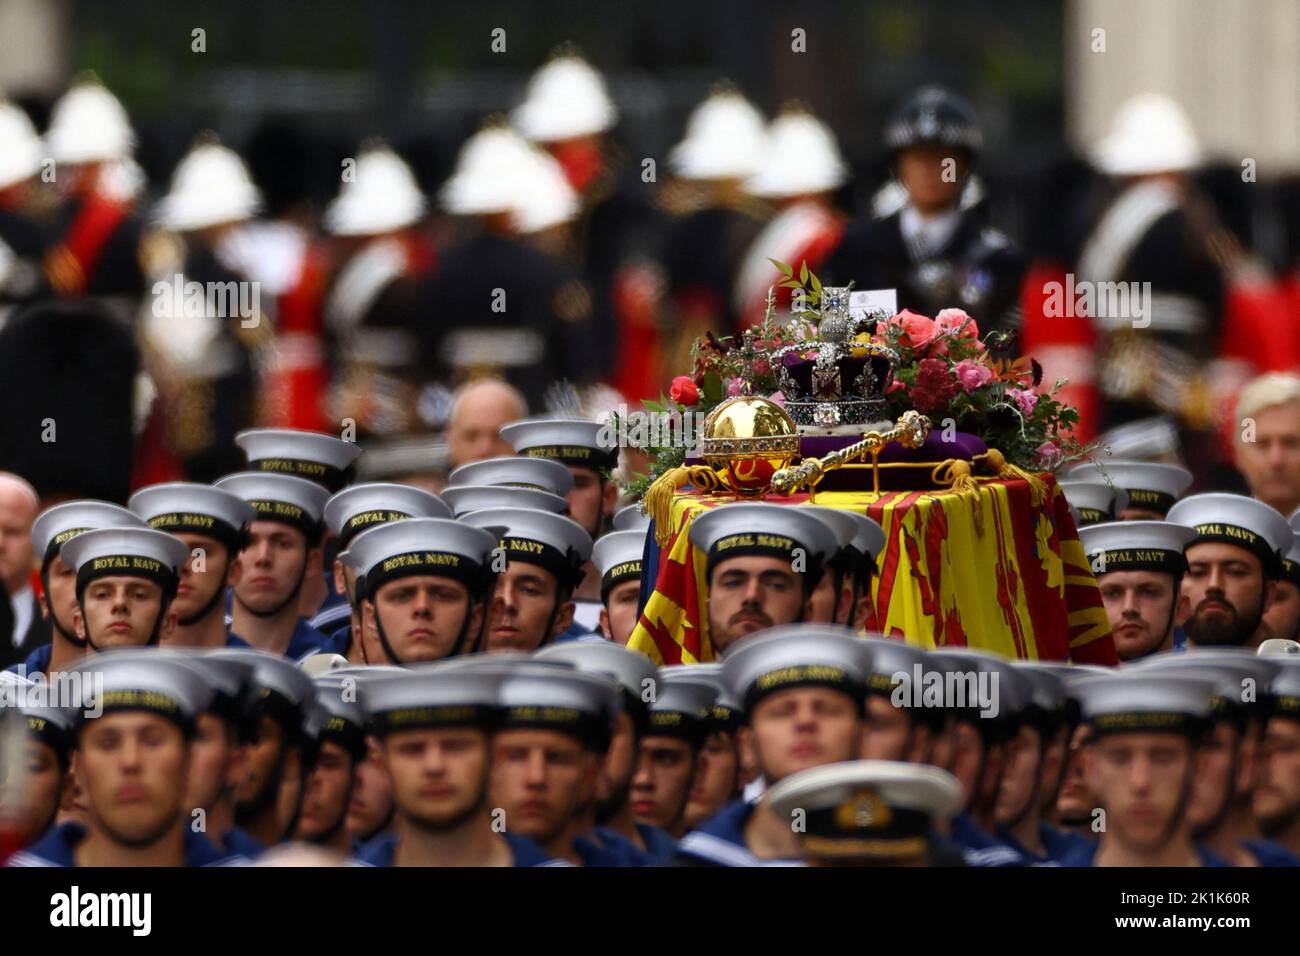 The coffin arrives outside Westminster Abbey on the day of the state funeral and burial of Britain's Queen Elizabeth, in London, Britain, September 19, 2022.  REUTERS/Kai Pfaffenbach     TPX IMAGES OF THE DAY Stock Photo